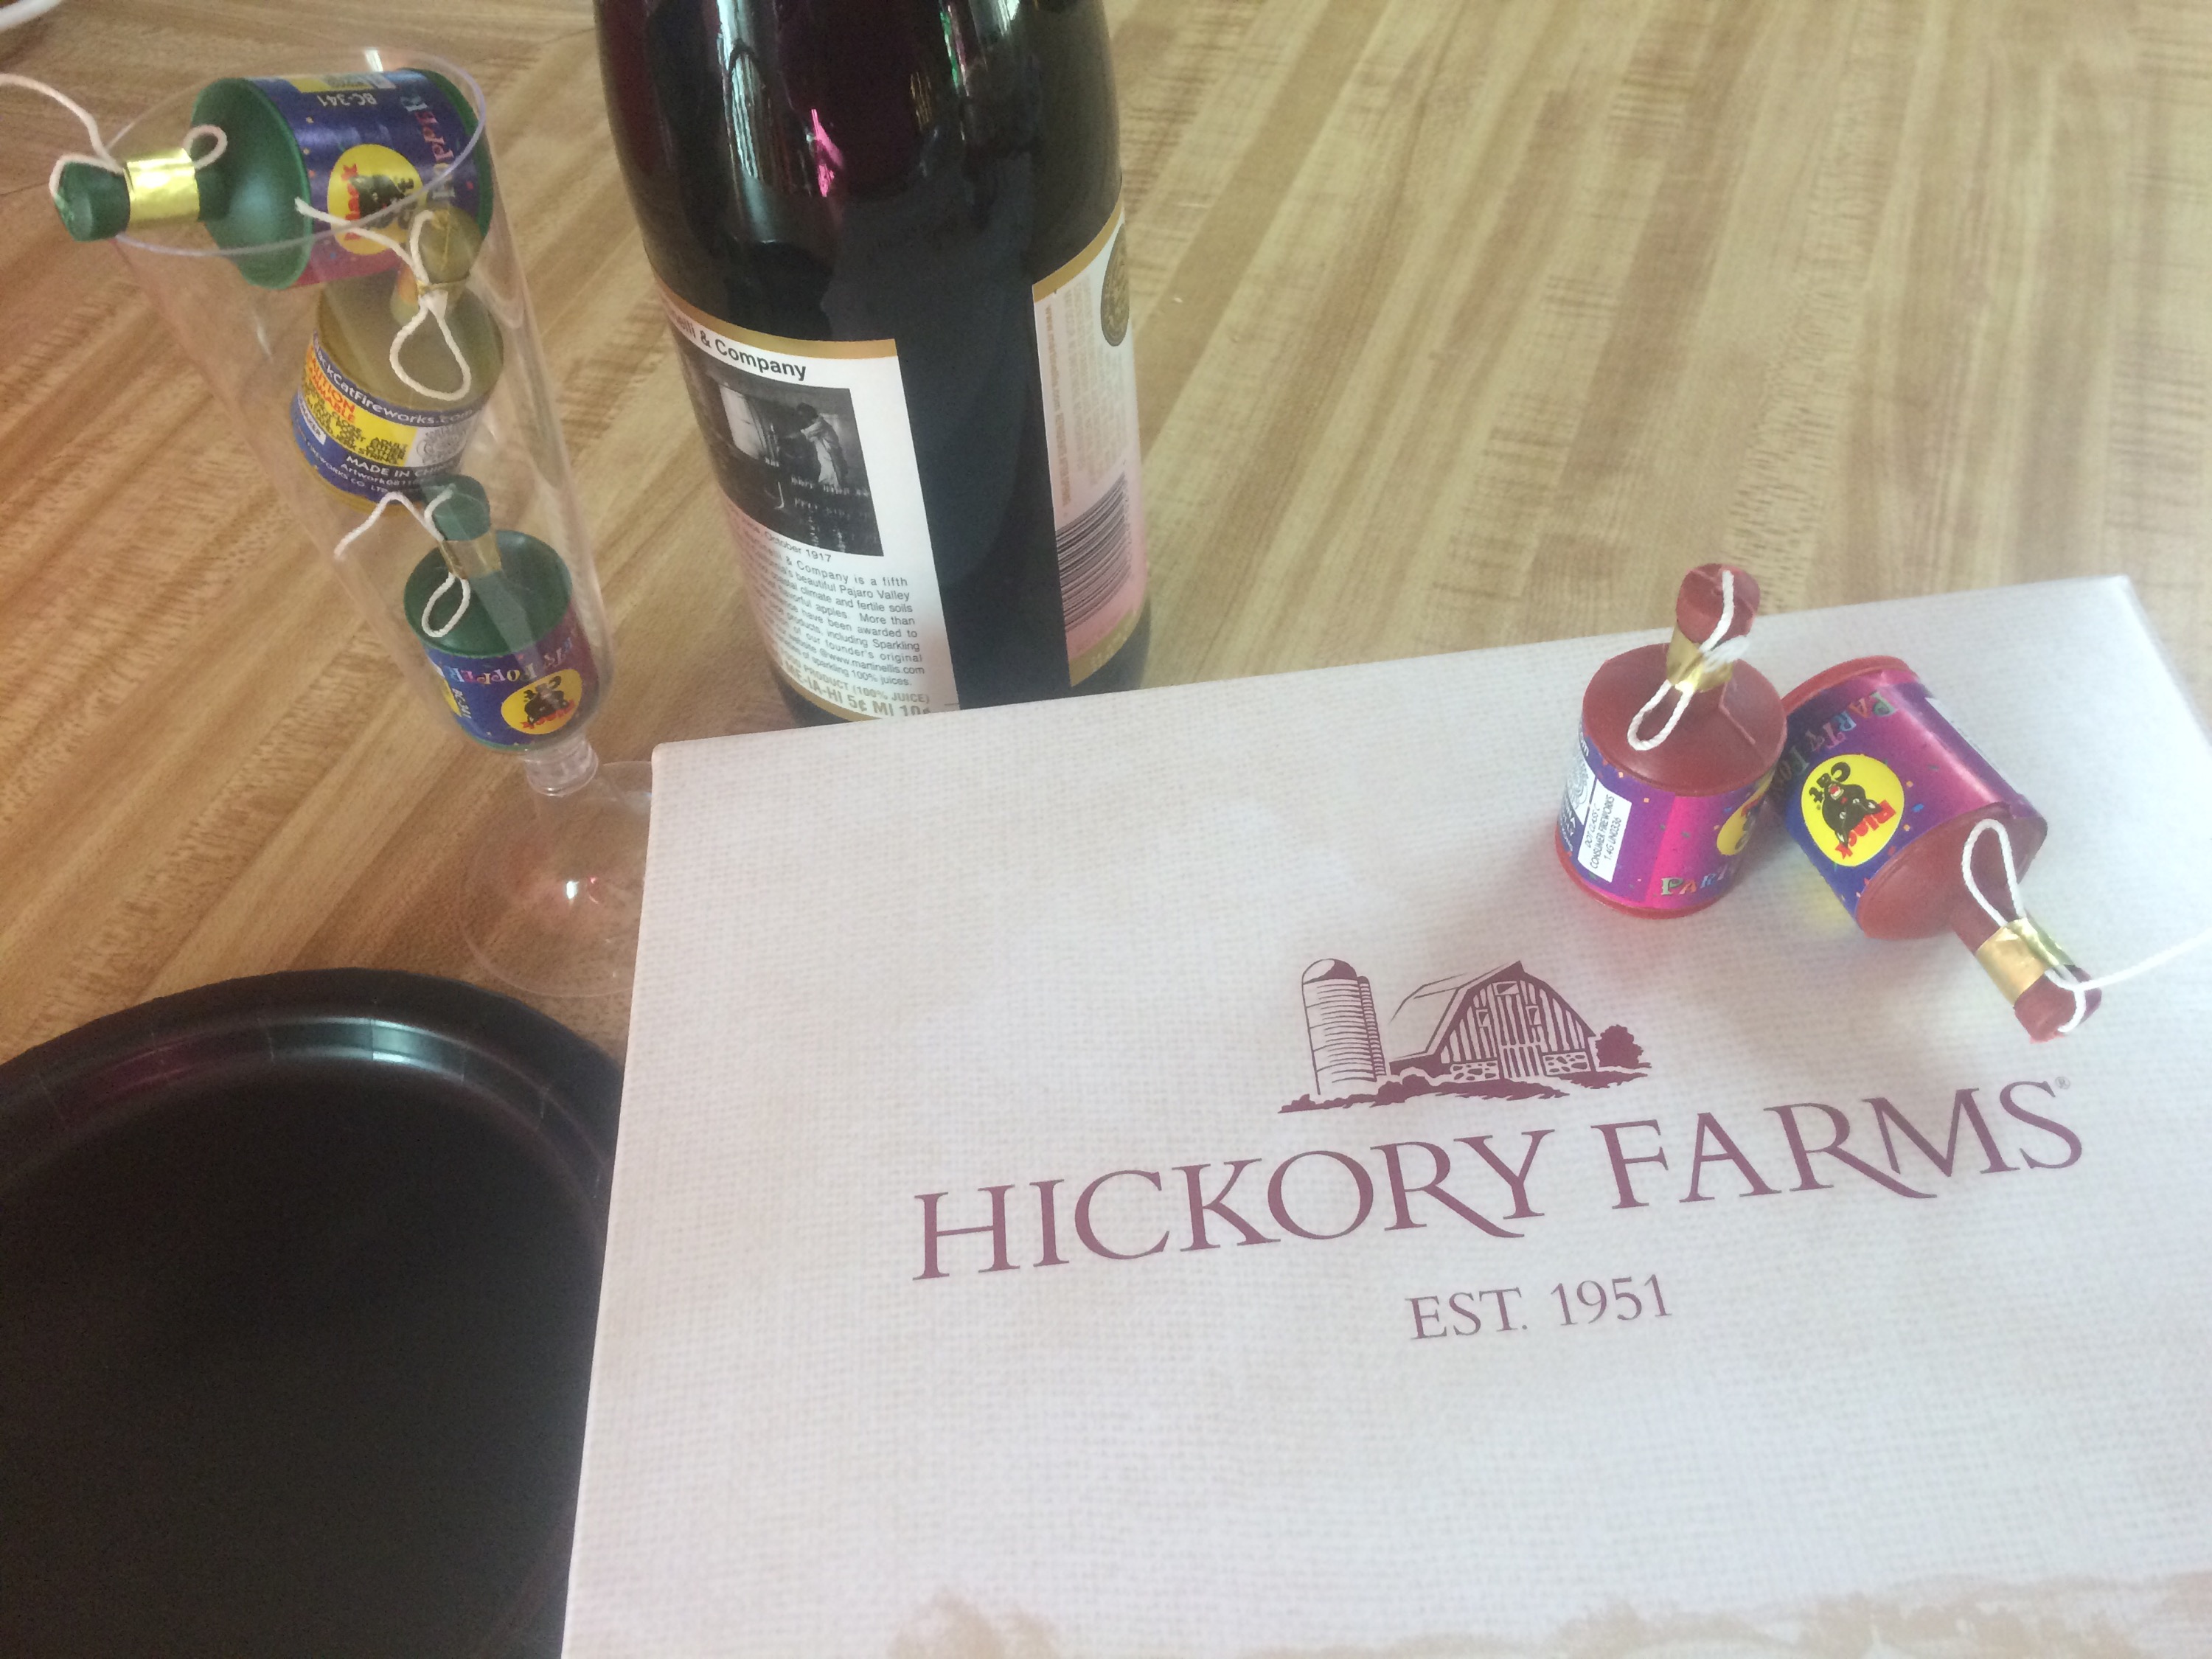 2014 Holiday Gift Guide: Be Classy This NYE, Give a Hostess Gift From Hickory Farms + Giveaway